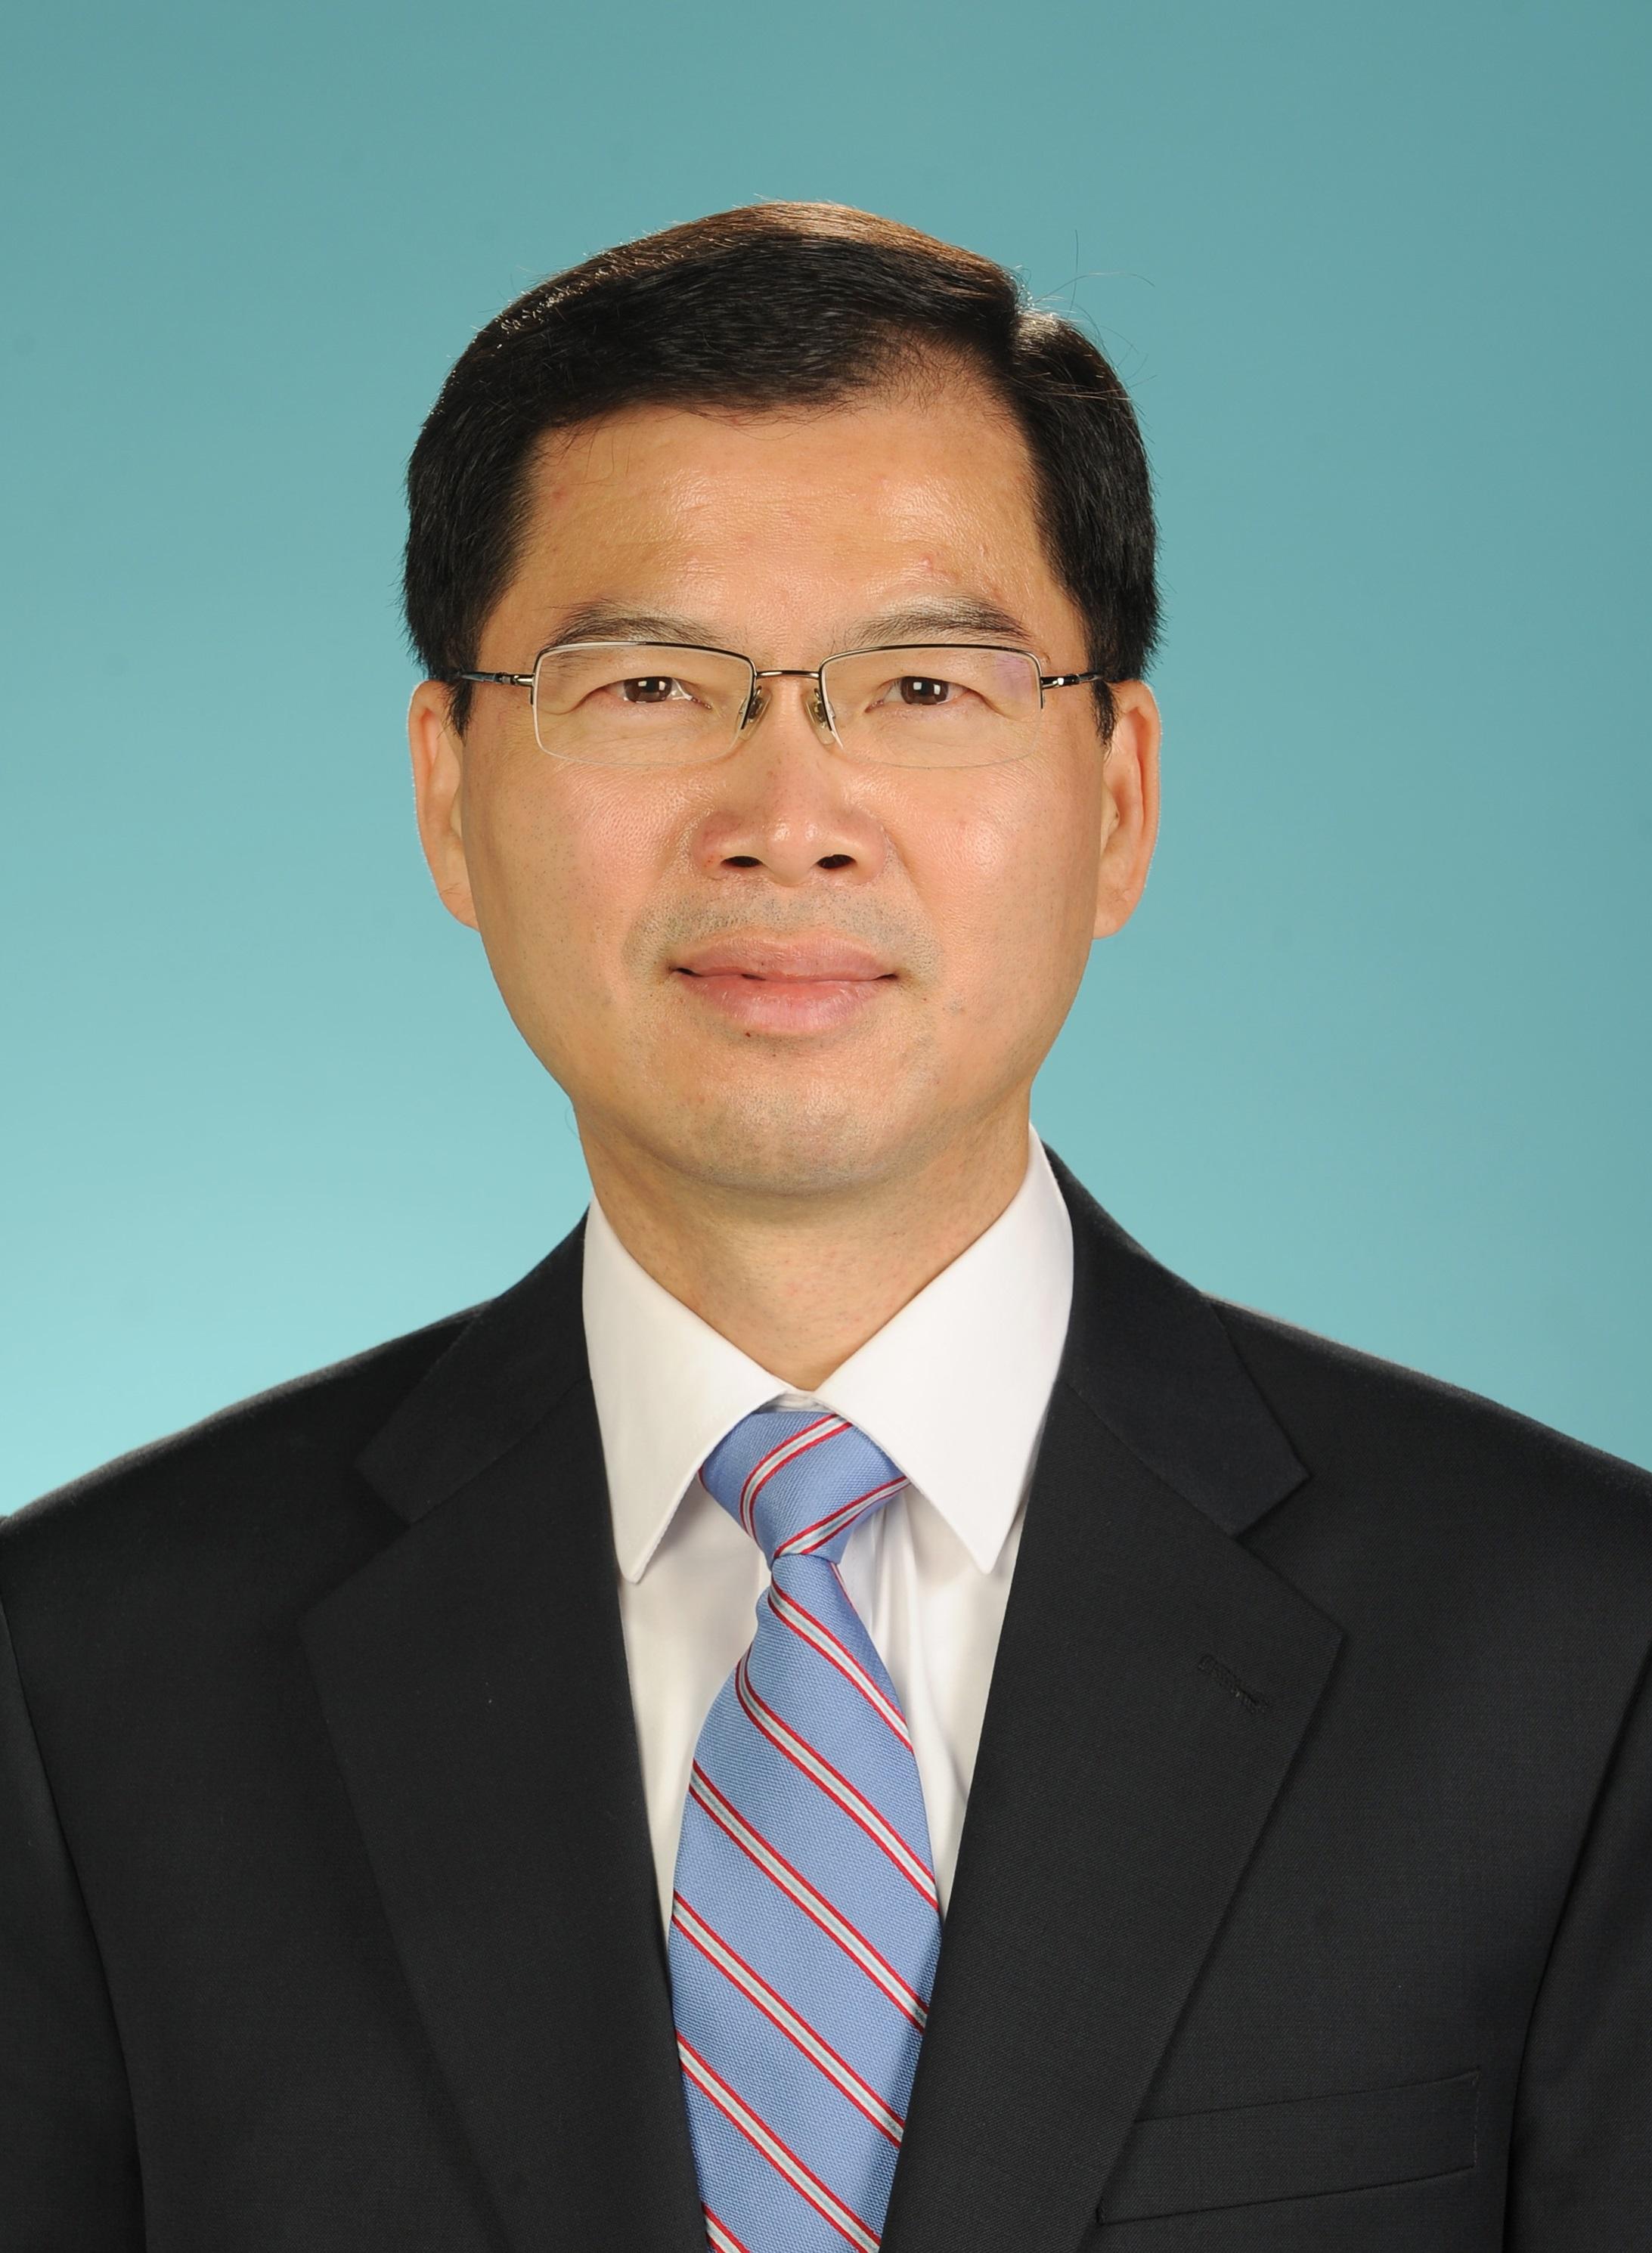 The Secretary General of the Committee for Safeguarding National Security of the Hong Kong Special Administrative Region, Mr Sonny Au Chi-kwong.